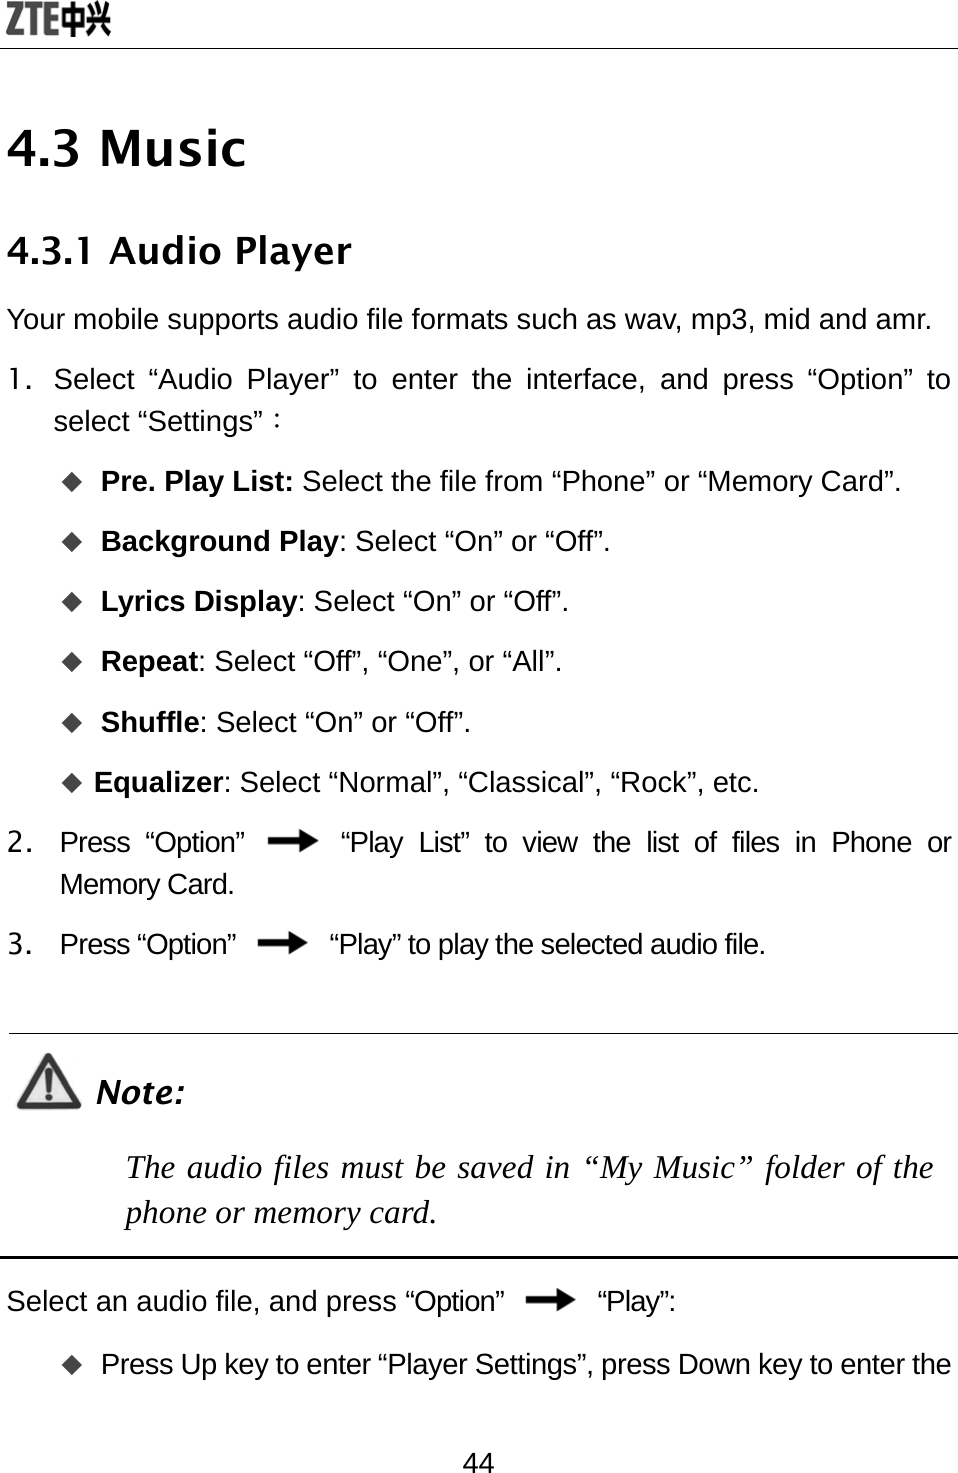  44 4.3 Music 4.3.1 Audio Player Your mobile supports audio file formats such as wav, mp3, mid and amr.   1.  Select “Audio Player” to enter the interface, and press “Option” to select “Settings”：  Pre. Play List: Select the file from “Phone” or “Memory Card”.  Background Play: Select “On” or “Off”.    Lyrics Display: Select “On” or “Off”.  Repeat: Select “Off”, “One”, or “All”.    Shuffle: Select “On” or “Off”.    Equalizer: Select “Normal”, “Classical”, “Rock”, etc.   2. Press “Option”   “Play List” to view the list of files in Phone or Memory Card. 3. Press “Option”    “Play” to play the selected audio file.    Note: The audio files must be saved in “My Music” folder of the phone or memory card.  Select an audio file, and press “Option”   “Play”:   Press Up key to enter “Player Settings”, press Down key to enter the 